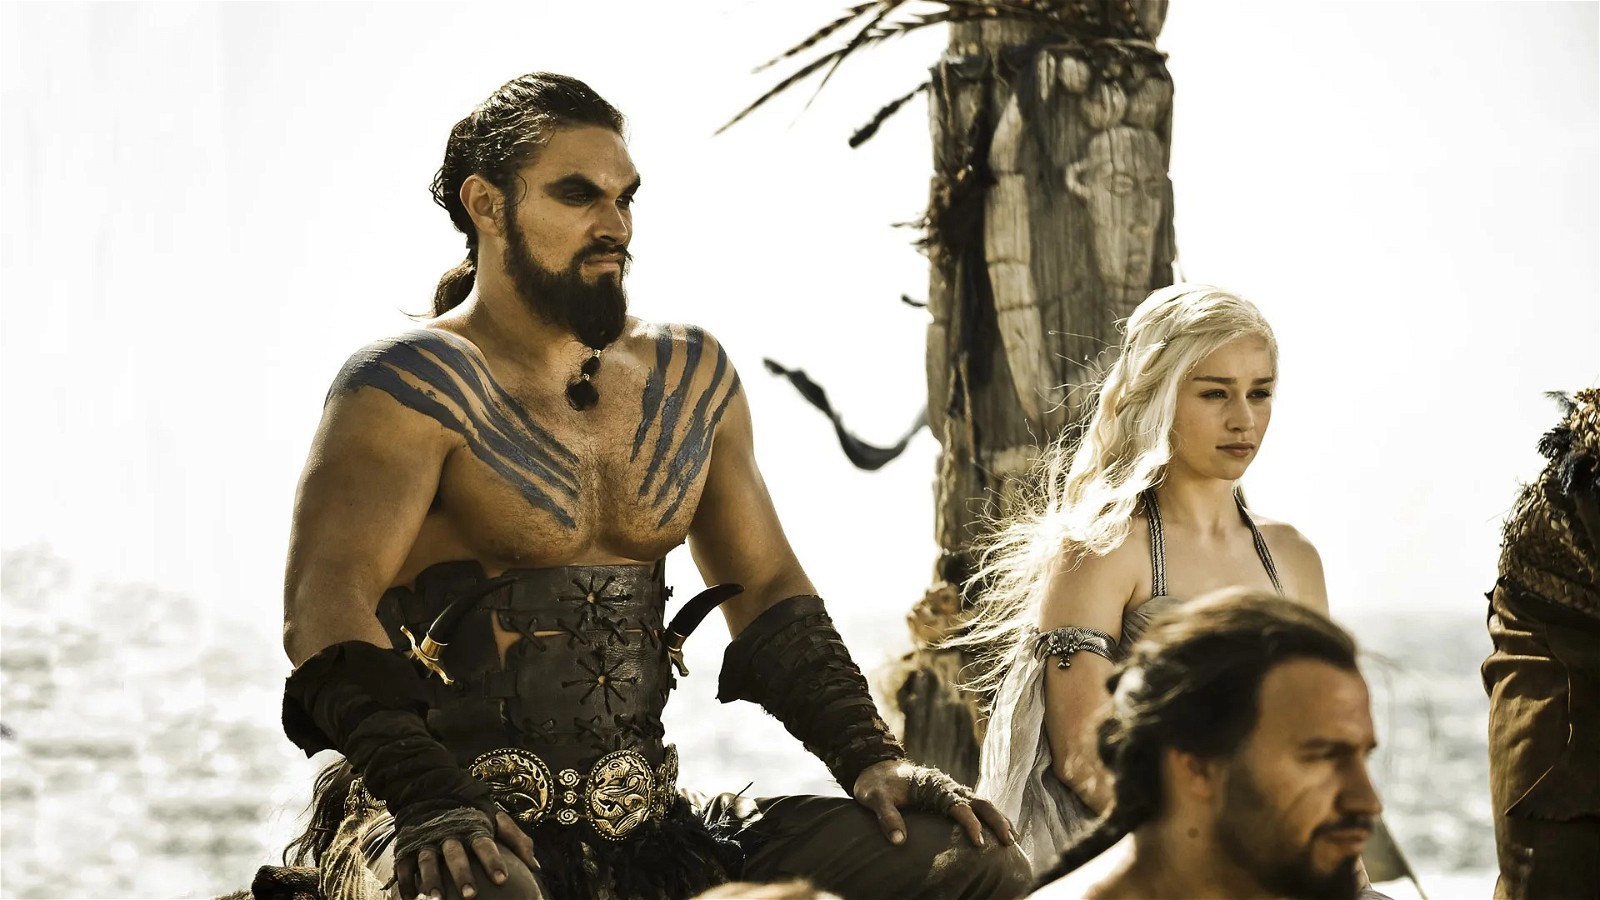 Jason Momoa and Emilia Clarke in Game of Thrones [Credit Home Box Office Inc.]